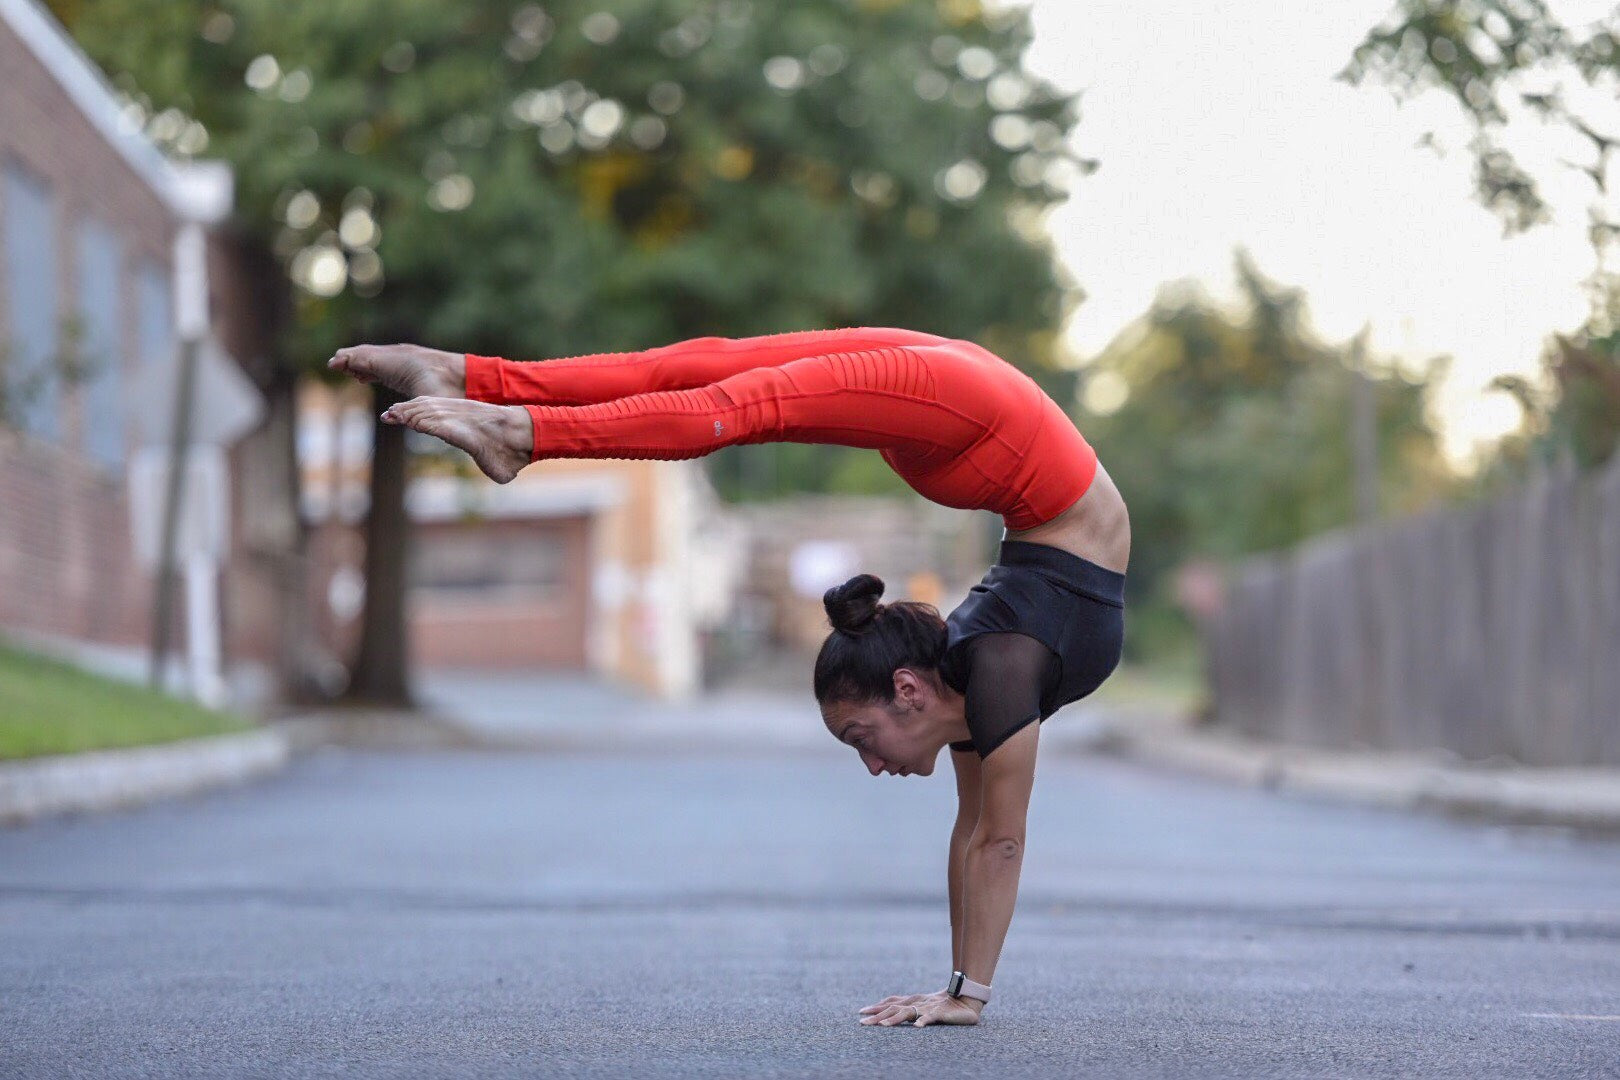 Practice Makes Perfect: Yogis' Proudest Poses